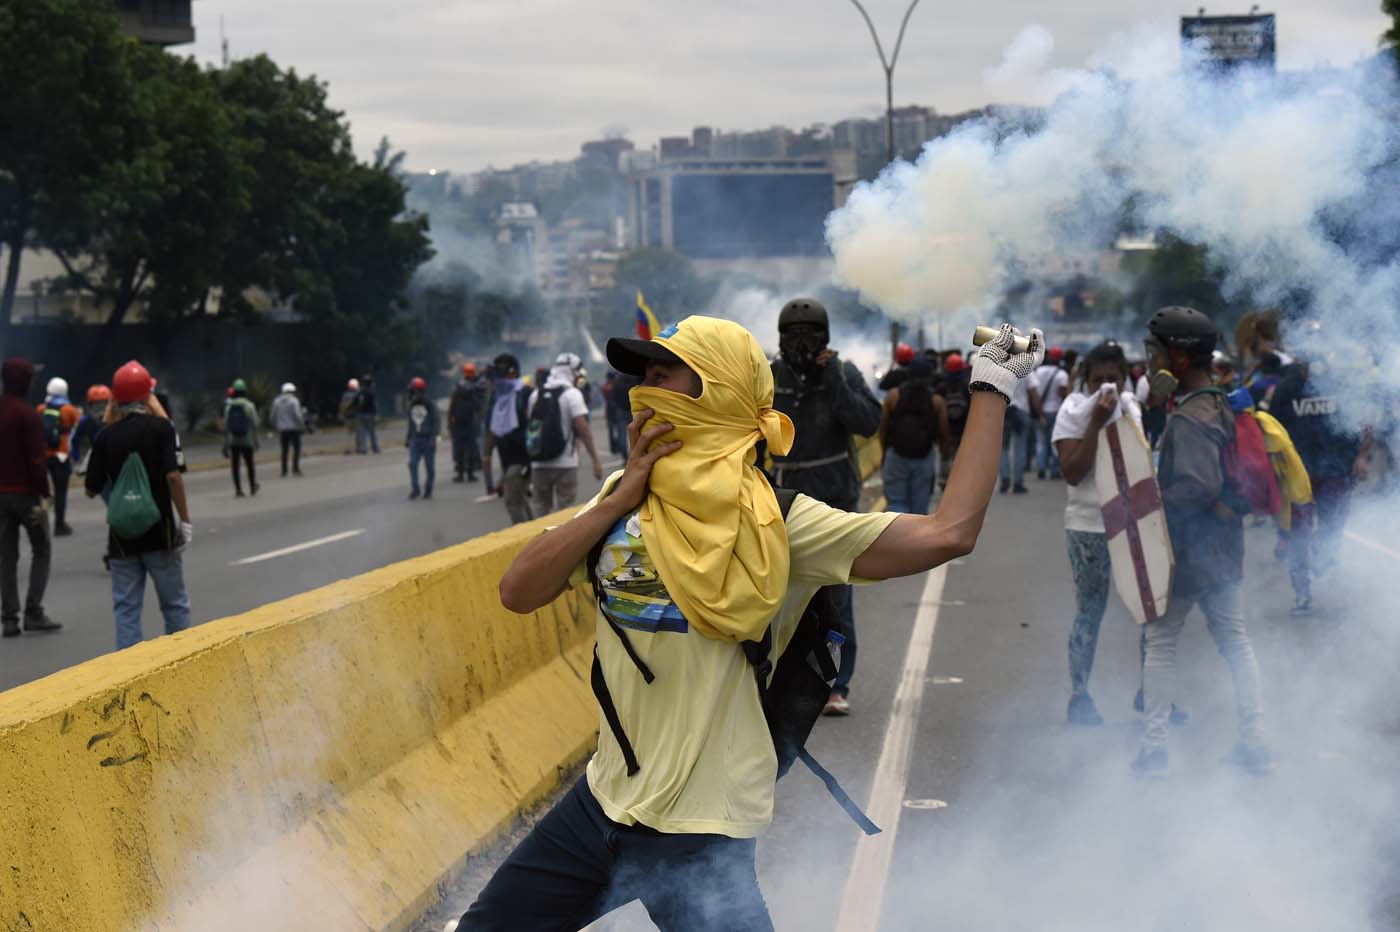 A demonstrator throws back tear gas to the police, during clashes within a protest against Venezuelan President Nicolas Maduro, in Caracas on May 3, 2017. Venezuela's angry opposition rallied Wednesday vowing huge street protests against President Nicolas Maduro's plan to rewrite the constitution and accusing him of dodging elections to cling to power despite deadly unrest. / AFP PHOTO / JUAN BARRETO